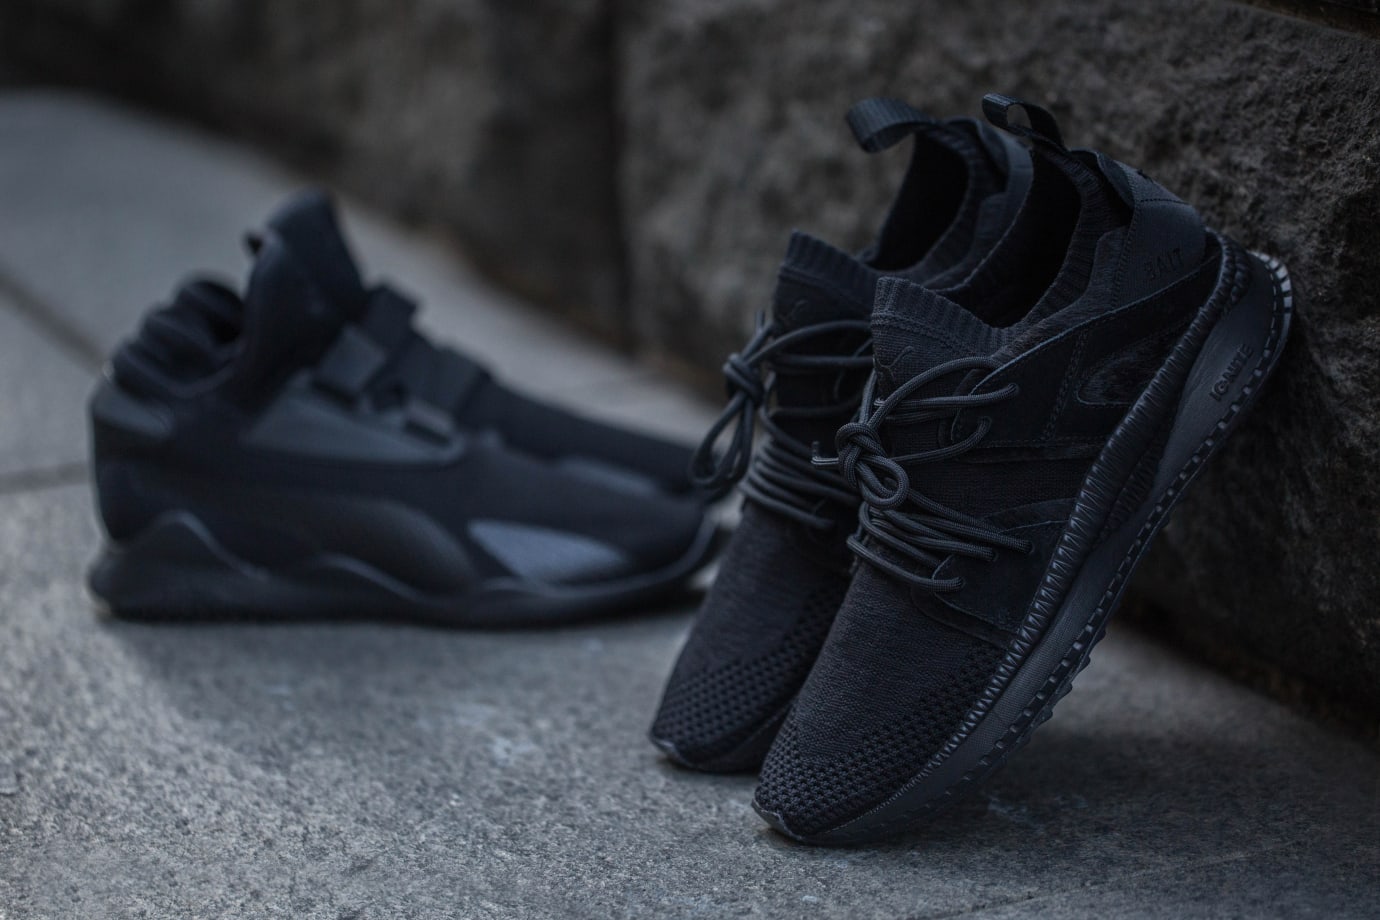 puma-bait-black-panther-collection